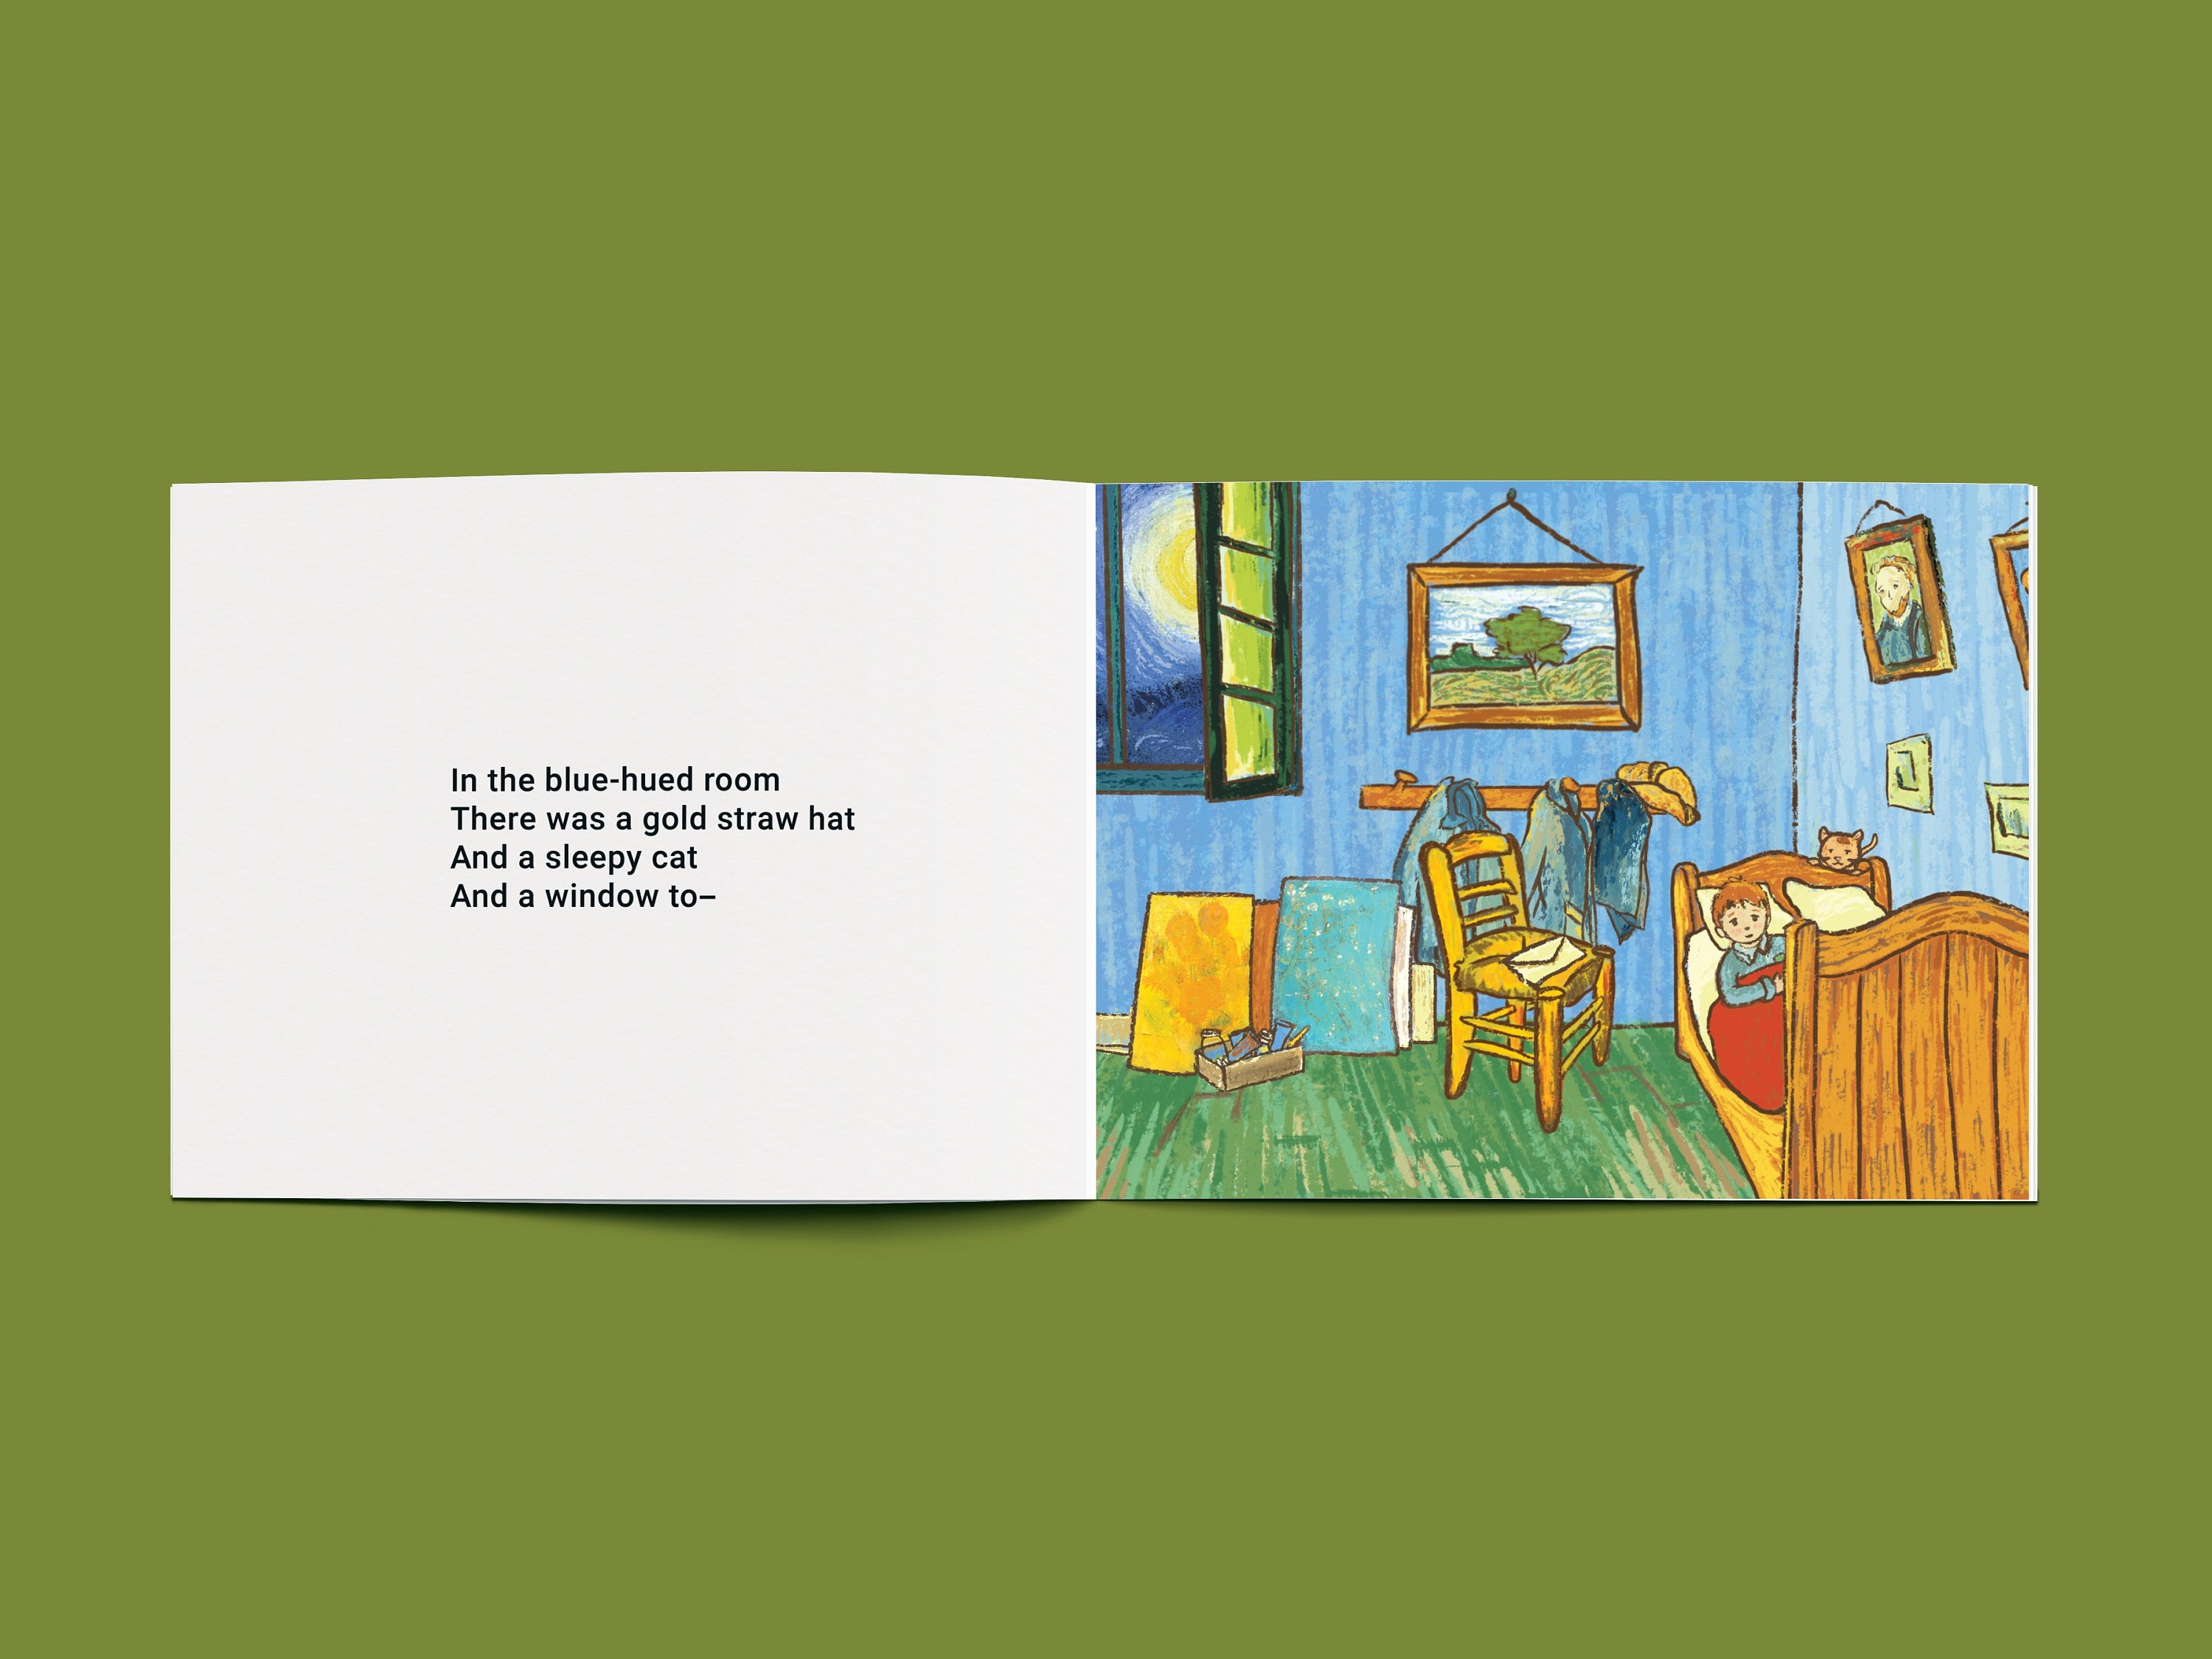 Goodnight Vincent  An Artist's Parody of Goodnight Moon - Children's Illustrated Bedtime Book - Vincent van Gogh